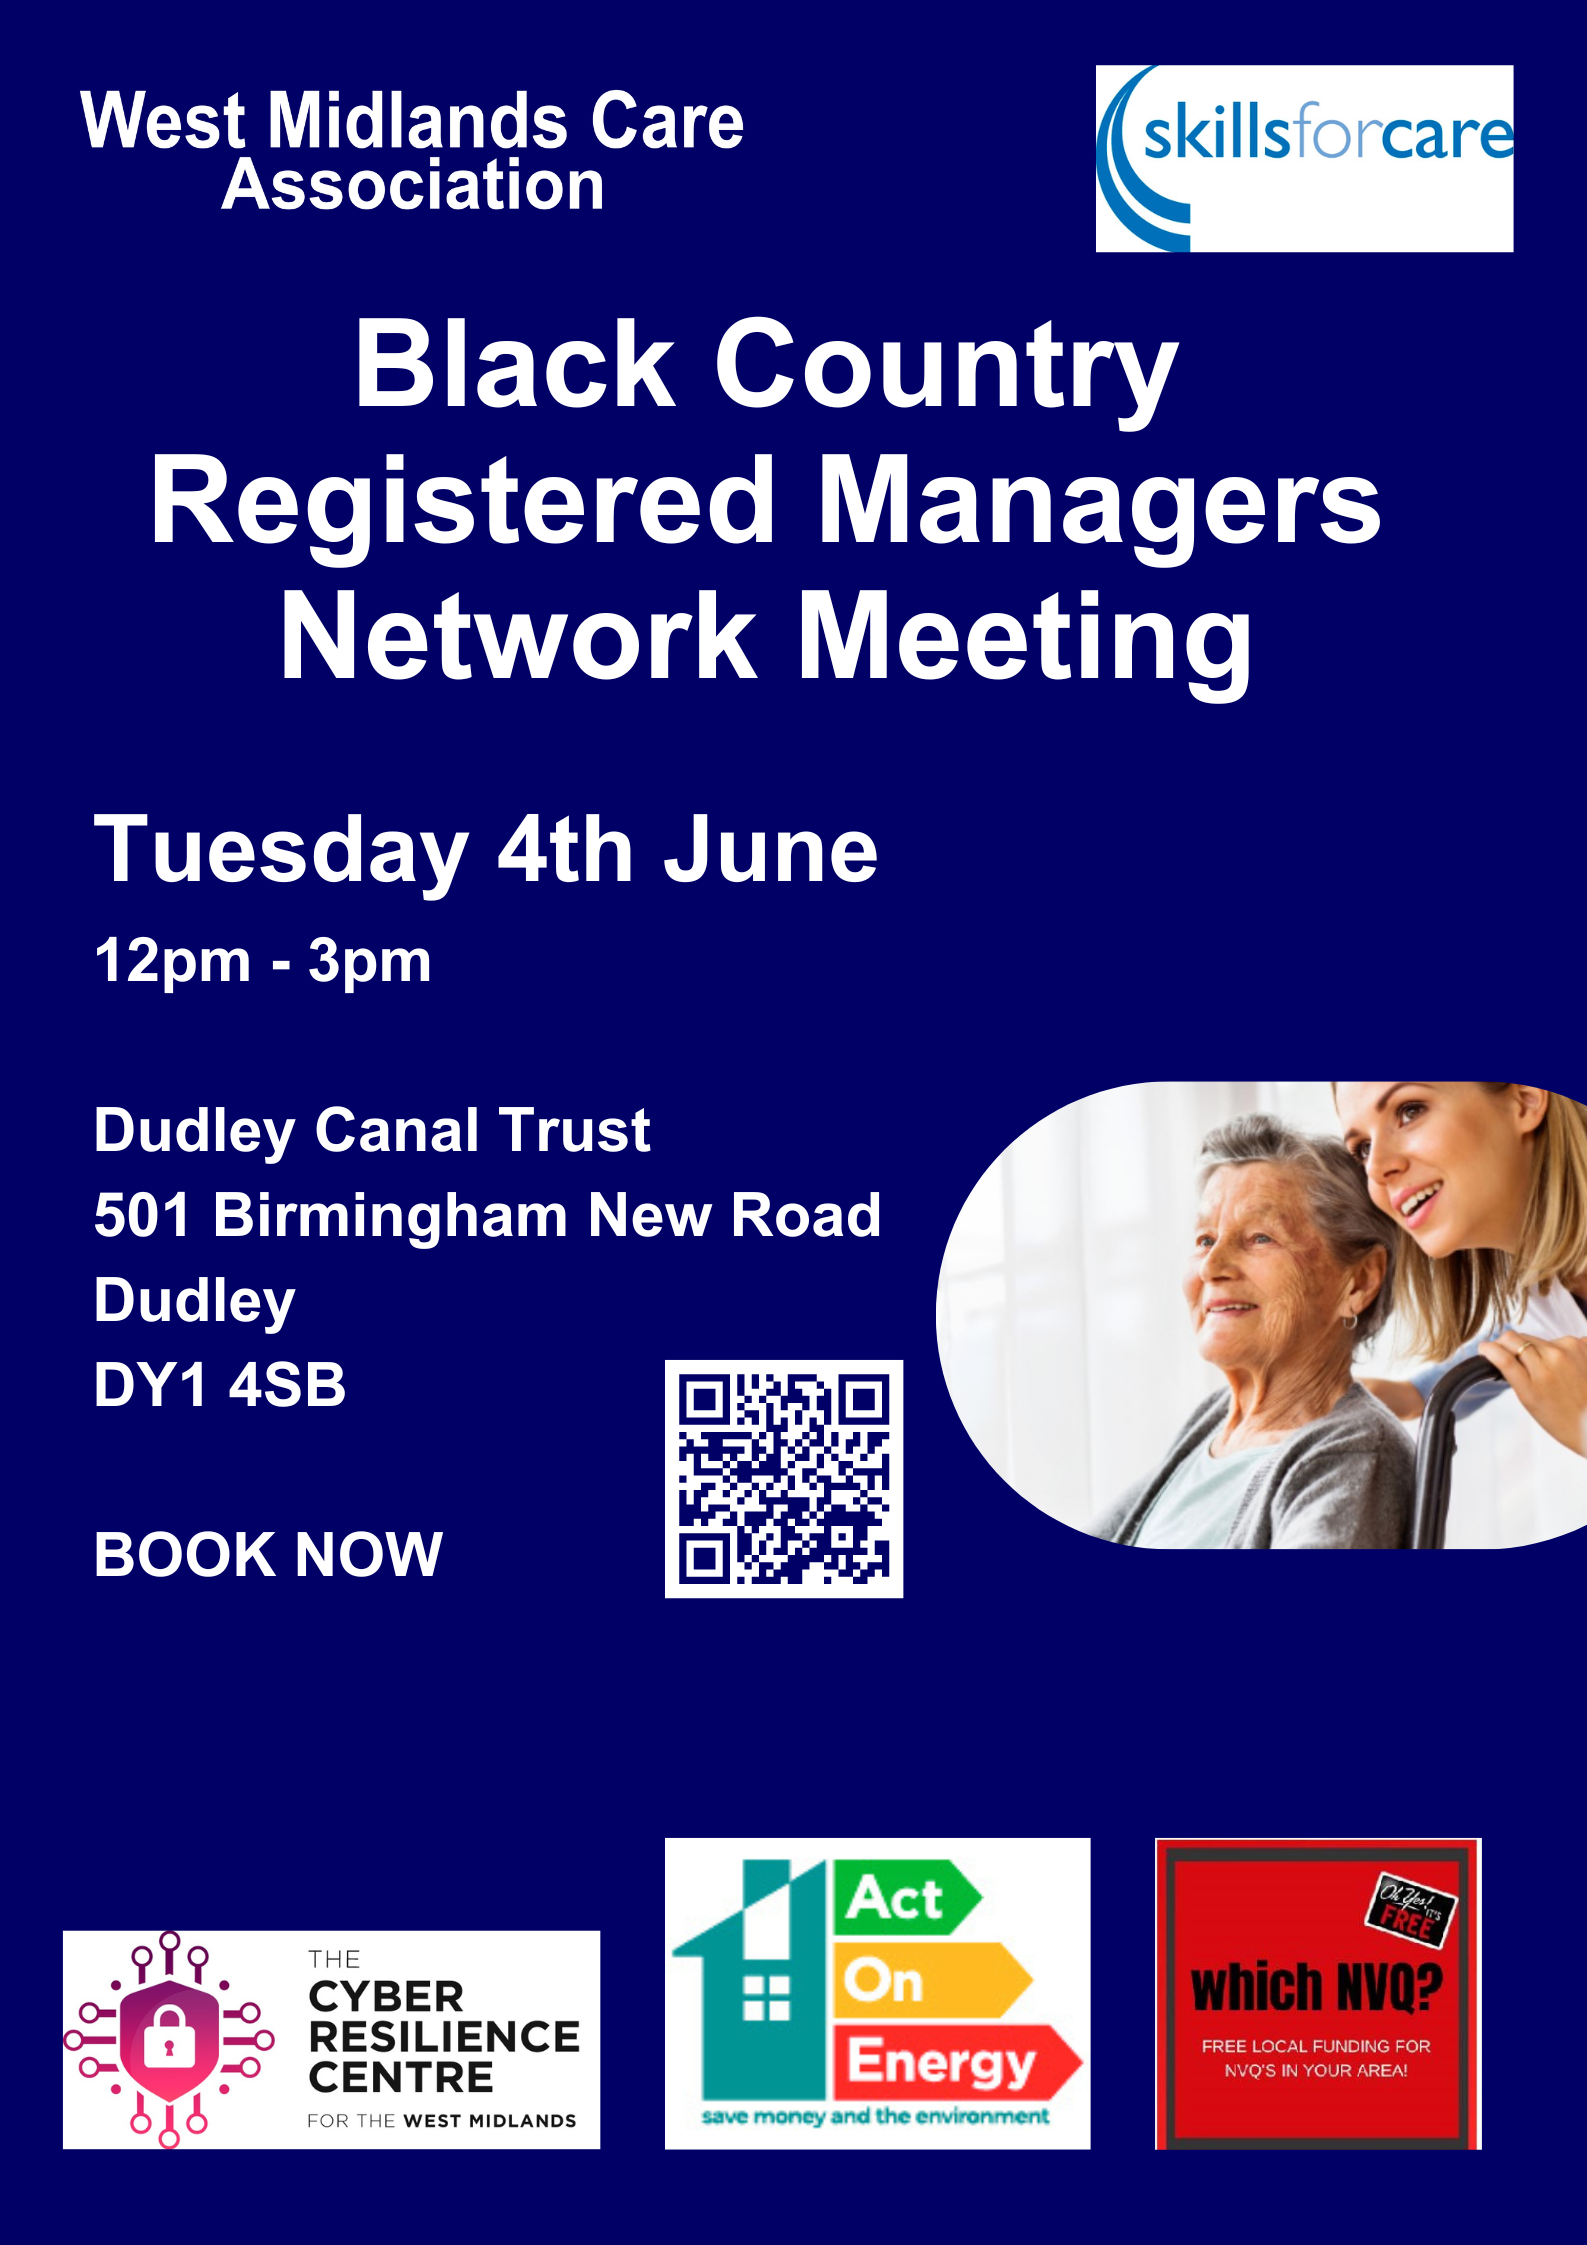 https://stratus.campaign-image.eu/images/32883000015804008_zc_v1_1713884558408_black_country_rmn_june_event.png